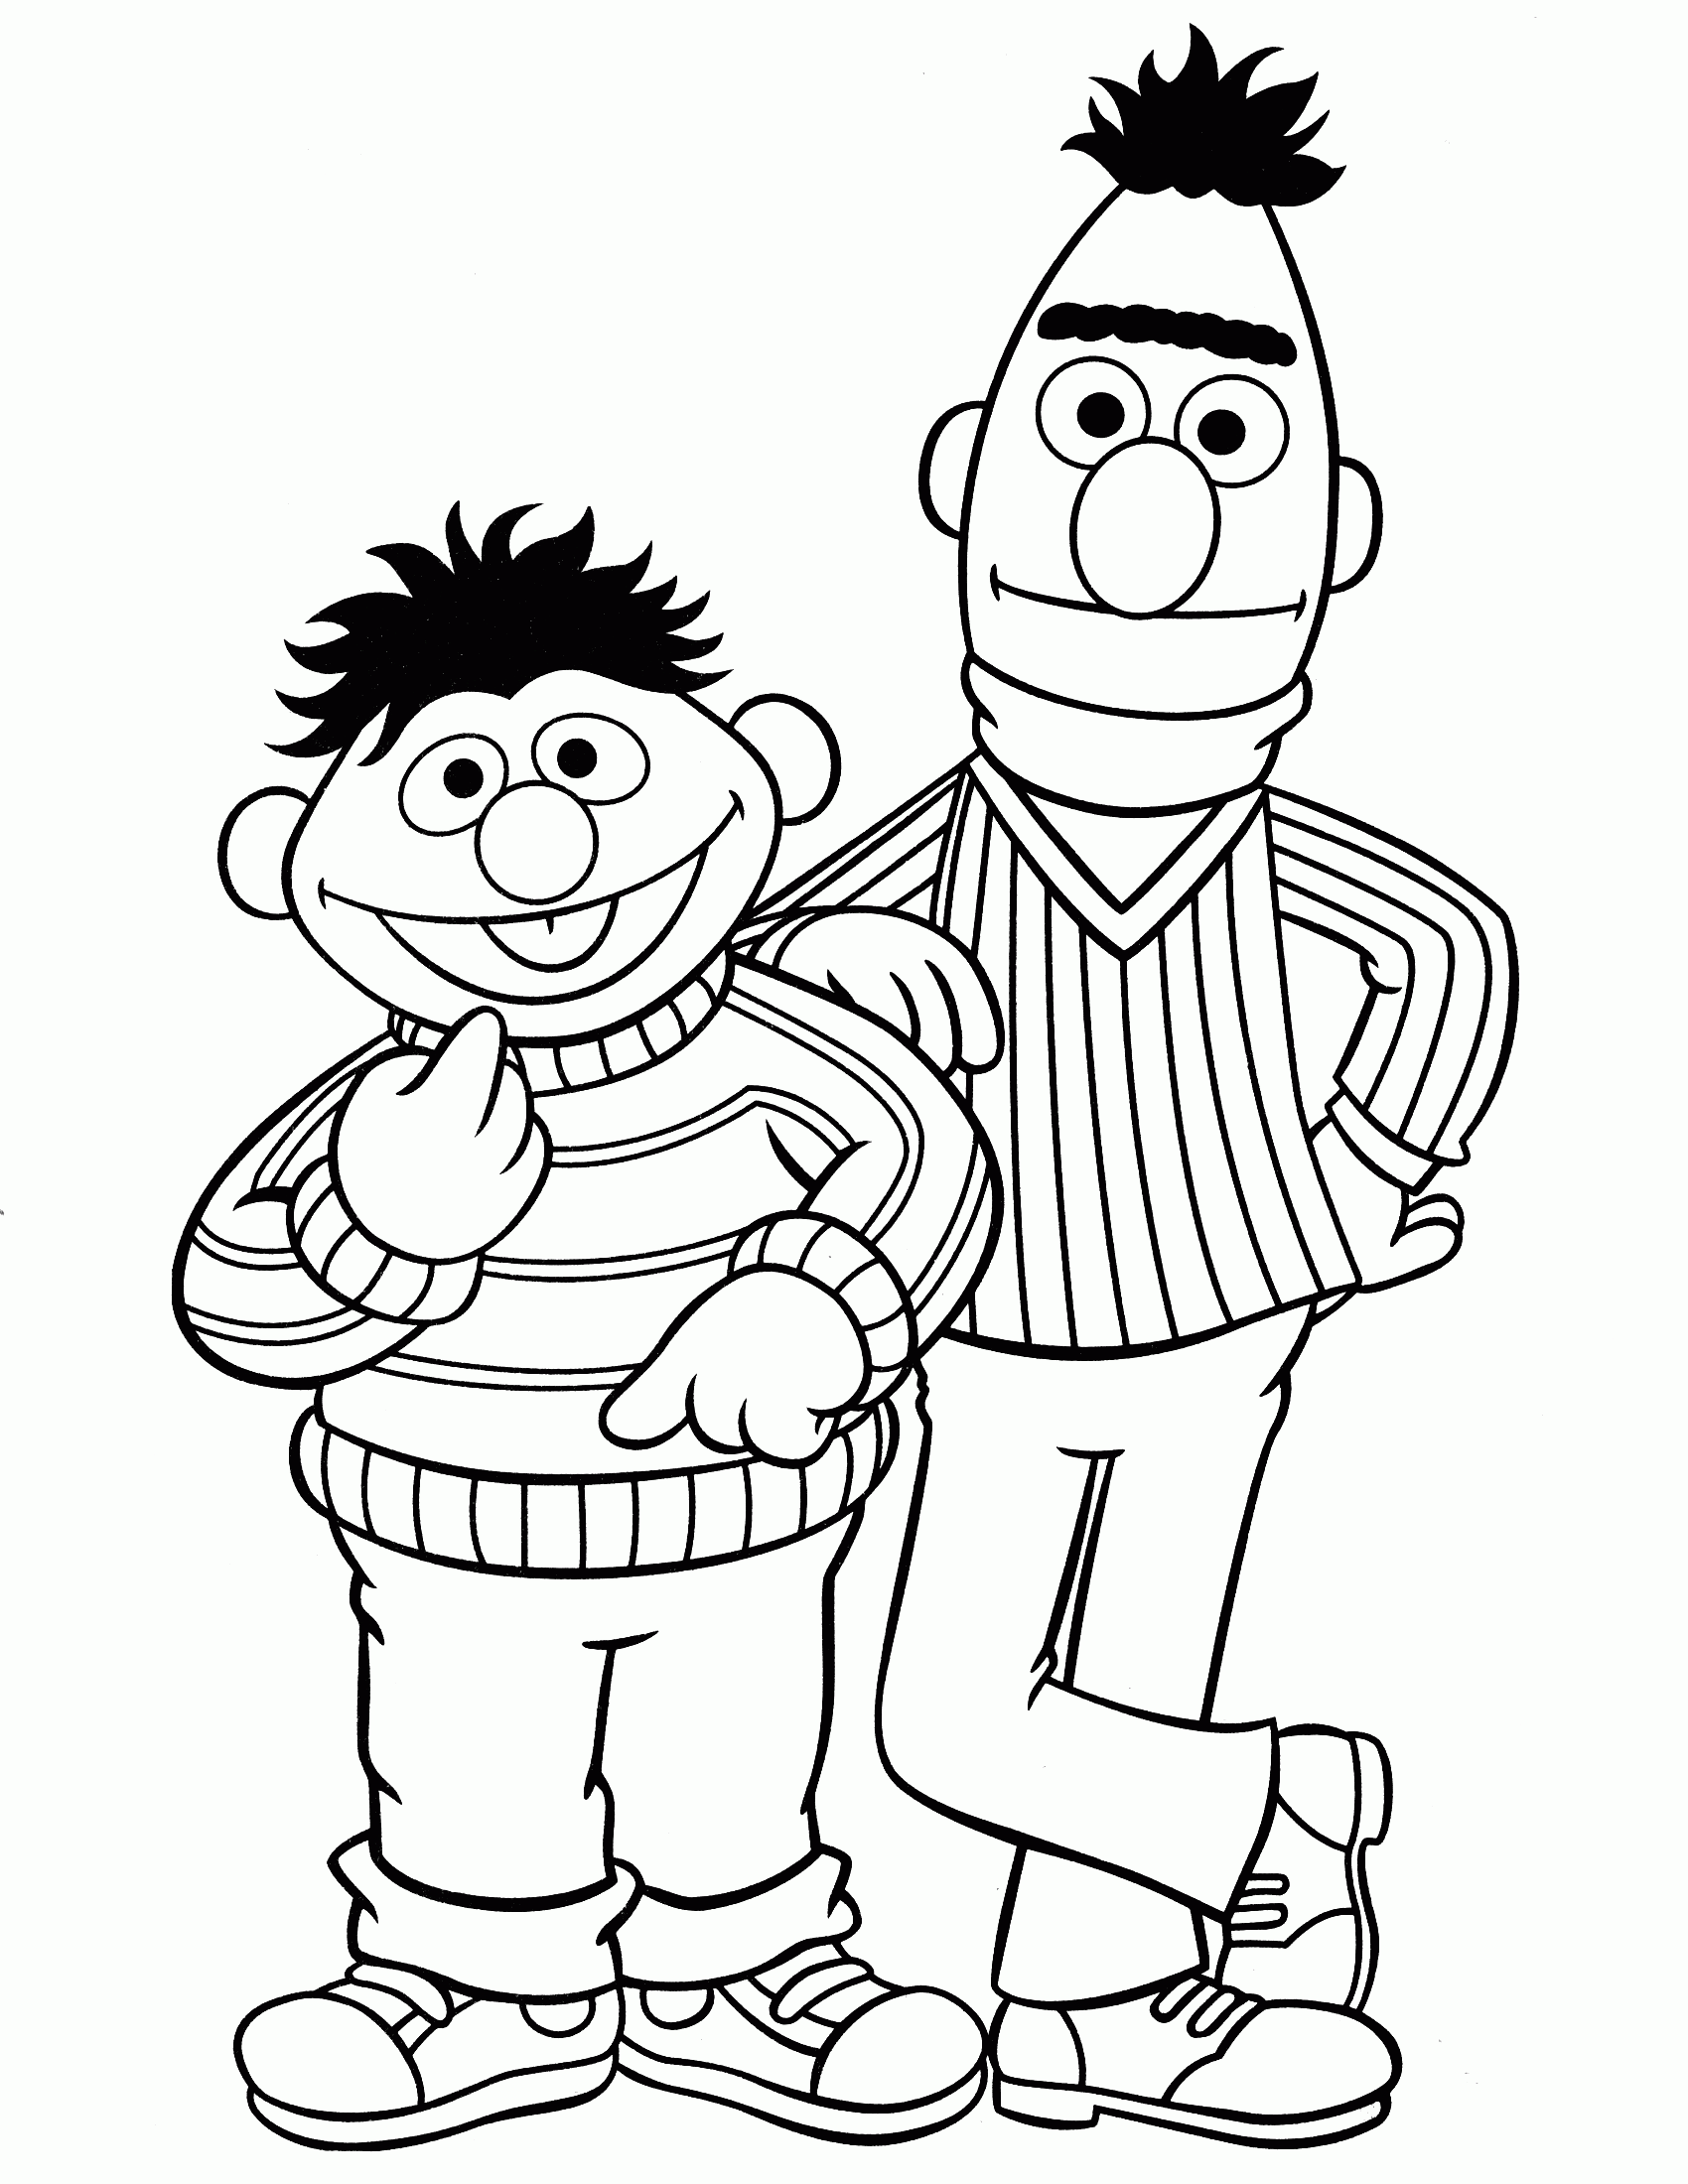 Sesame Street Coloring Pages and Book | UniqueColoringPages